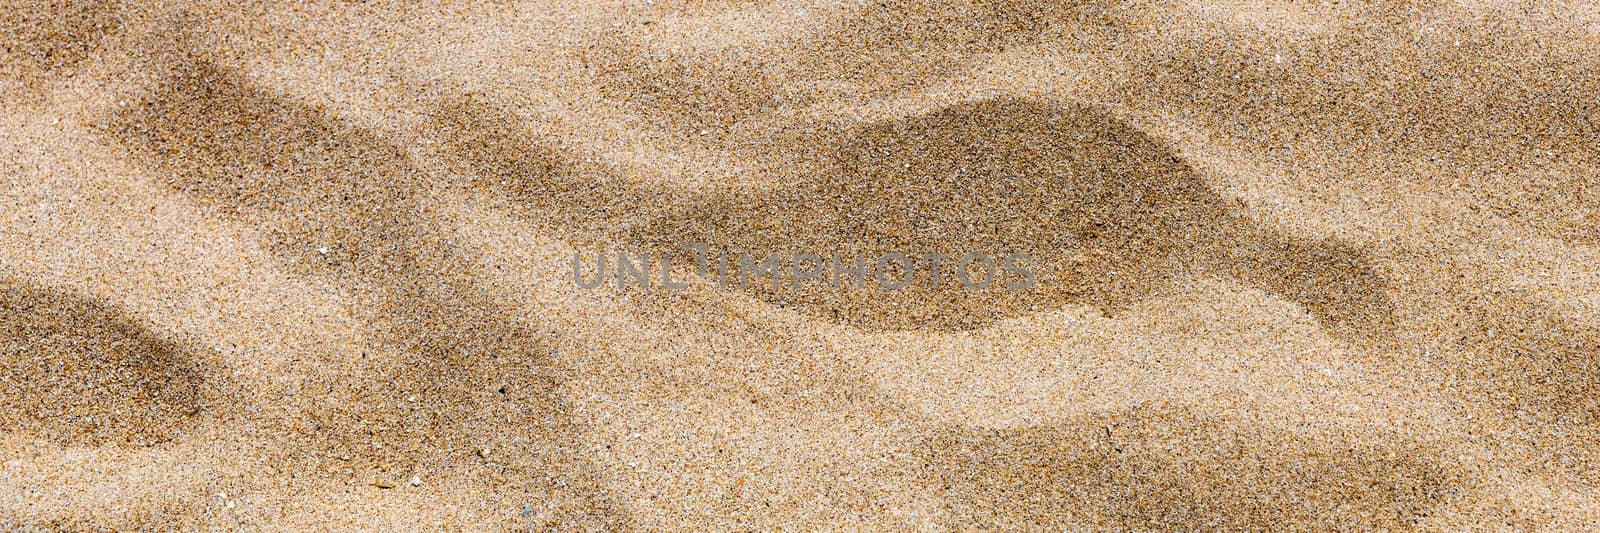 Sand surface and background. Sand Texture. Brown sand. Backgroun by DaLiu